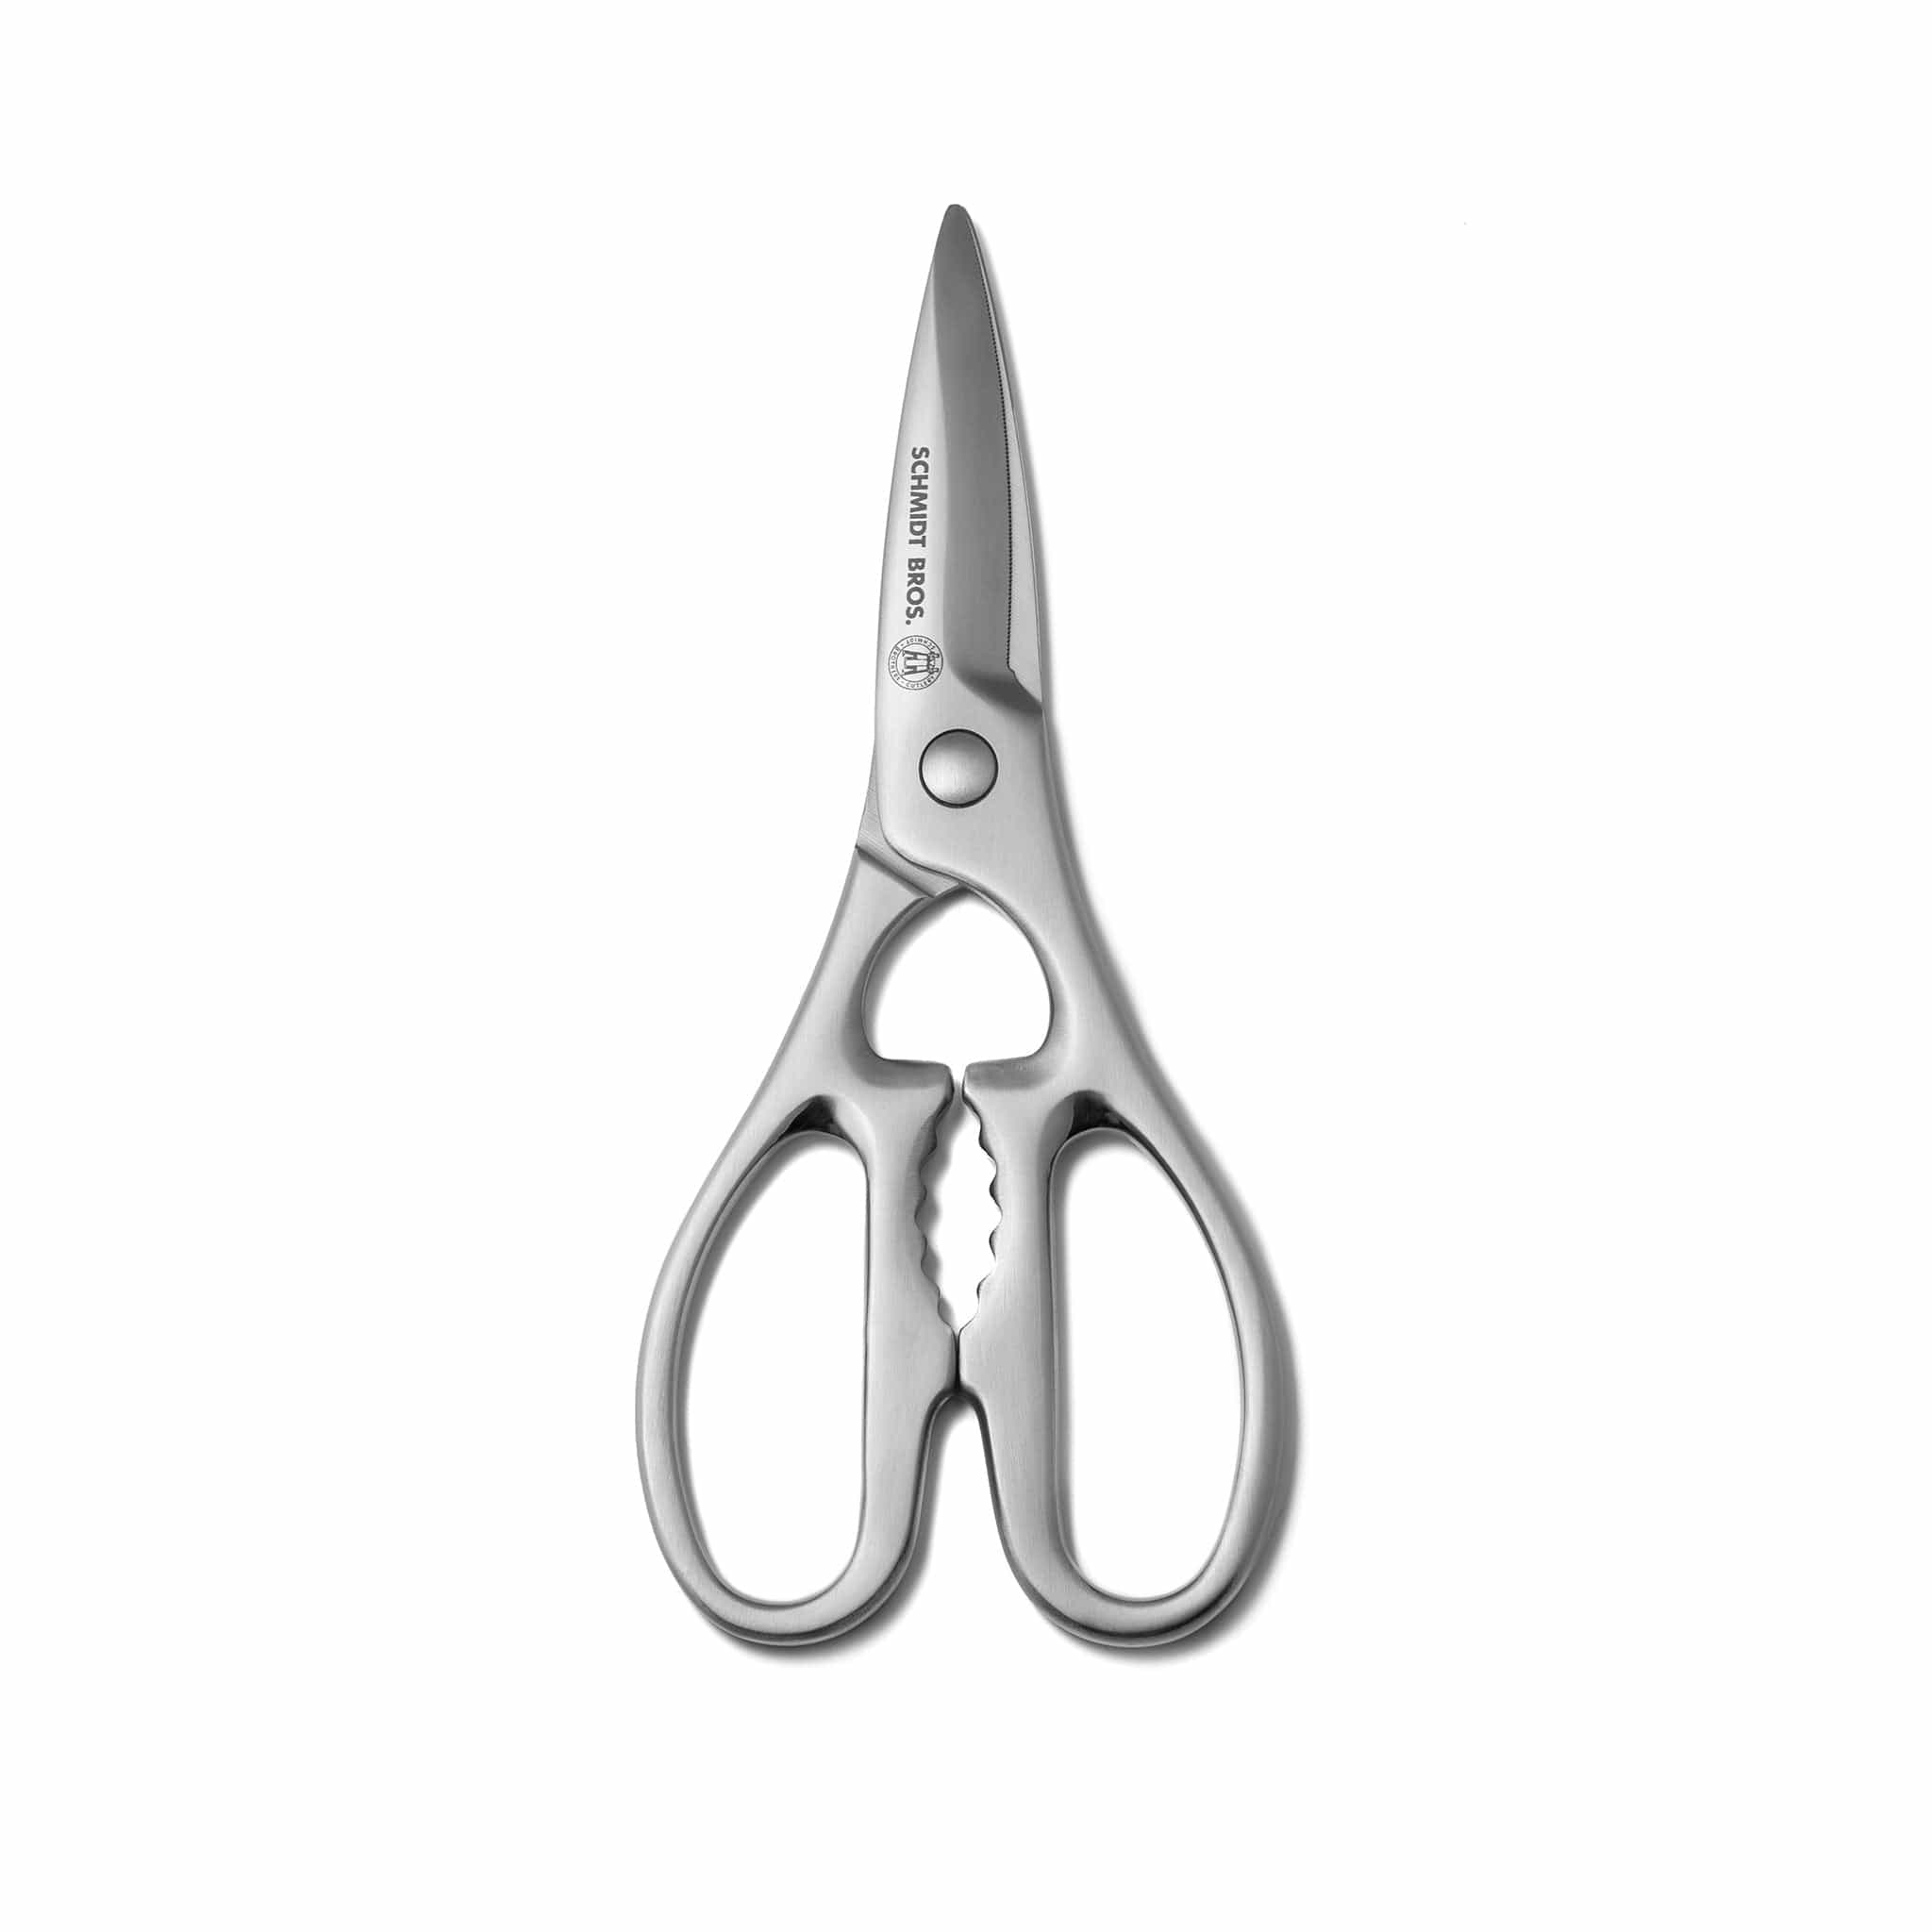 Stainless Steel Easy Cut Kitchen Shearing Scissors – Cook With Steel